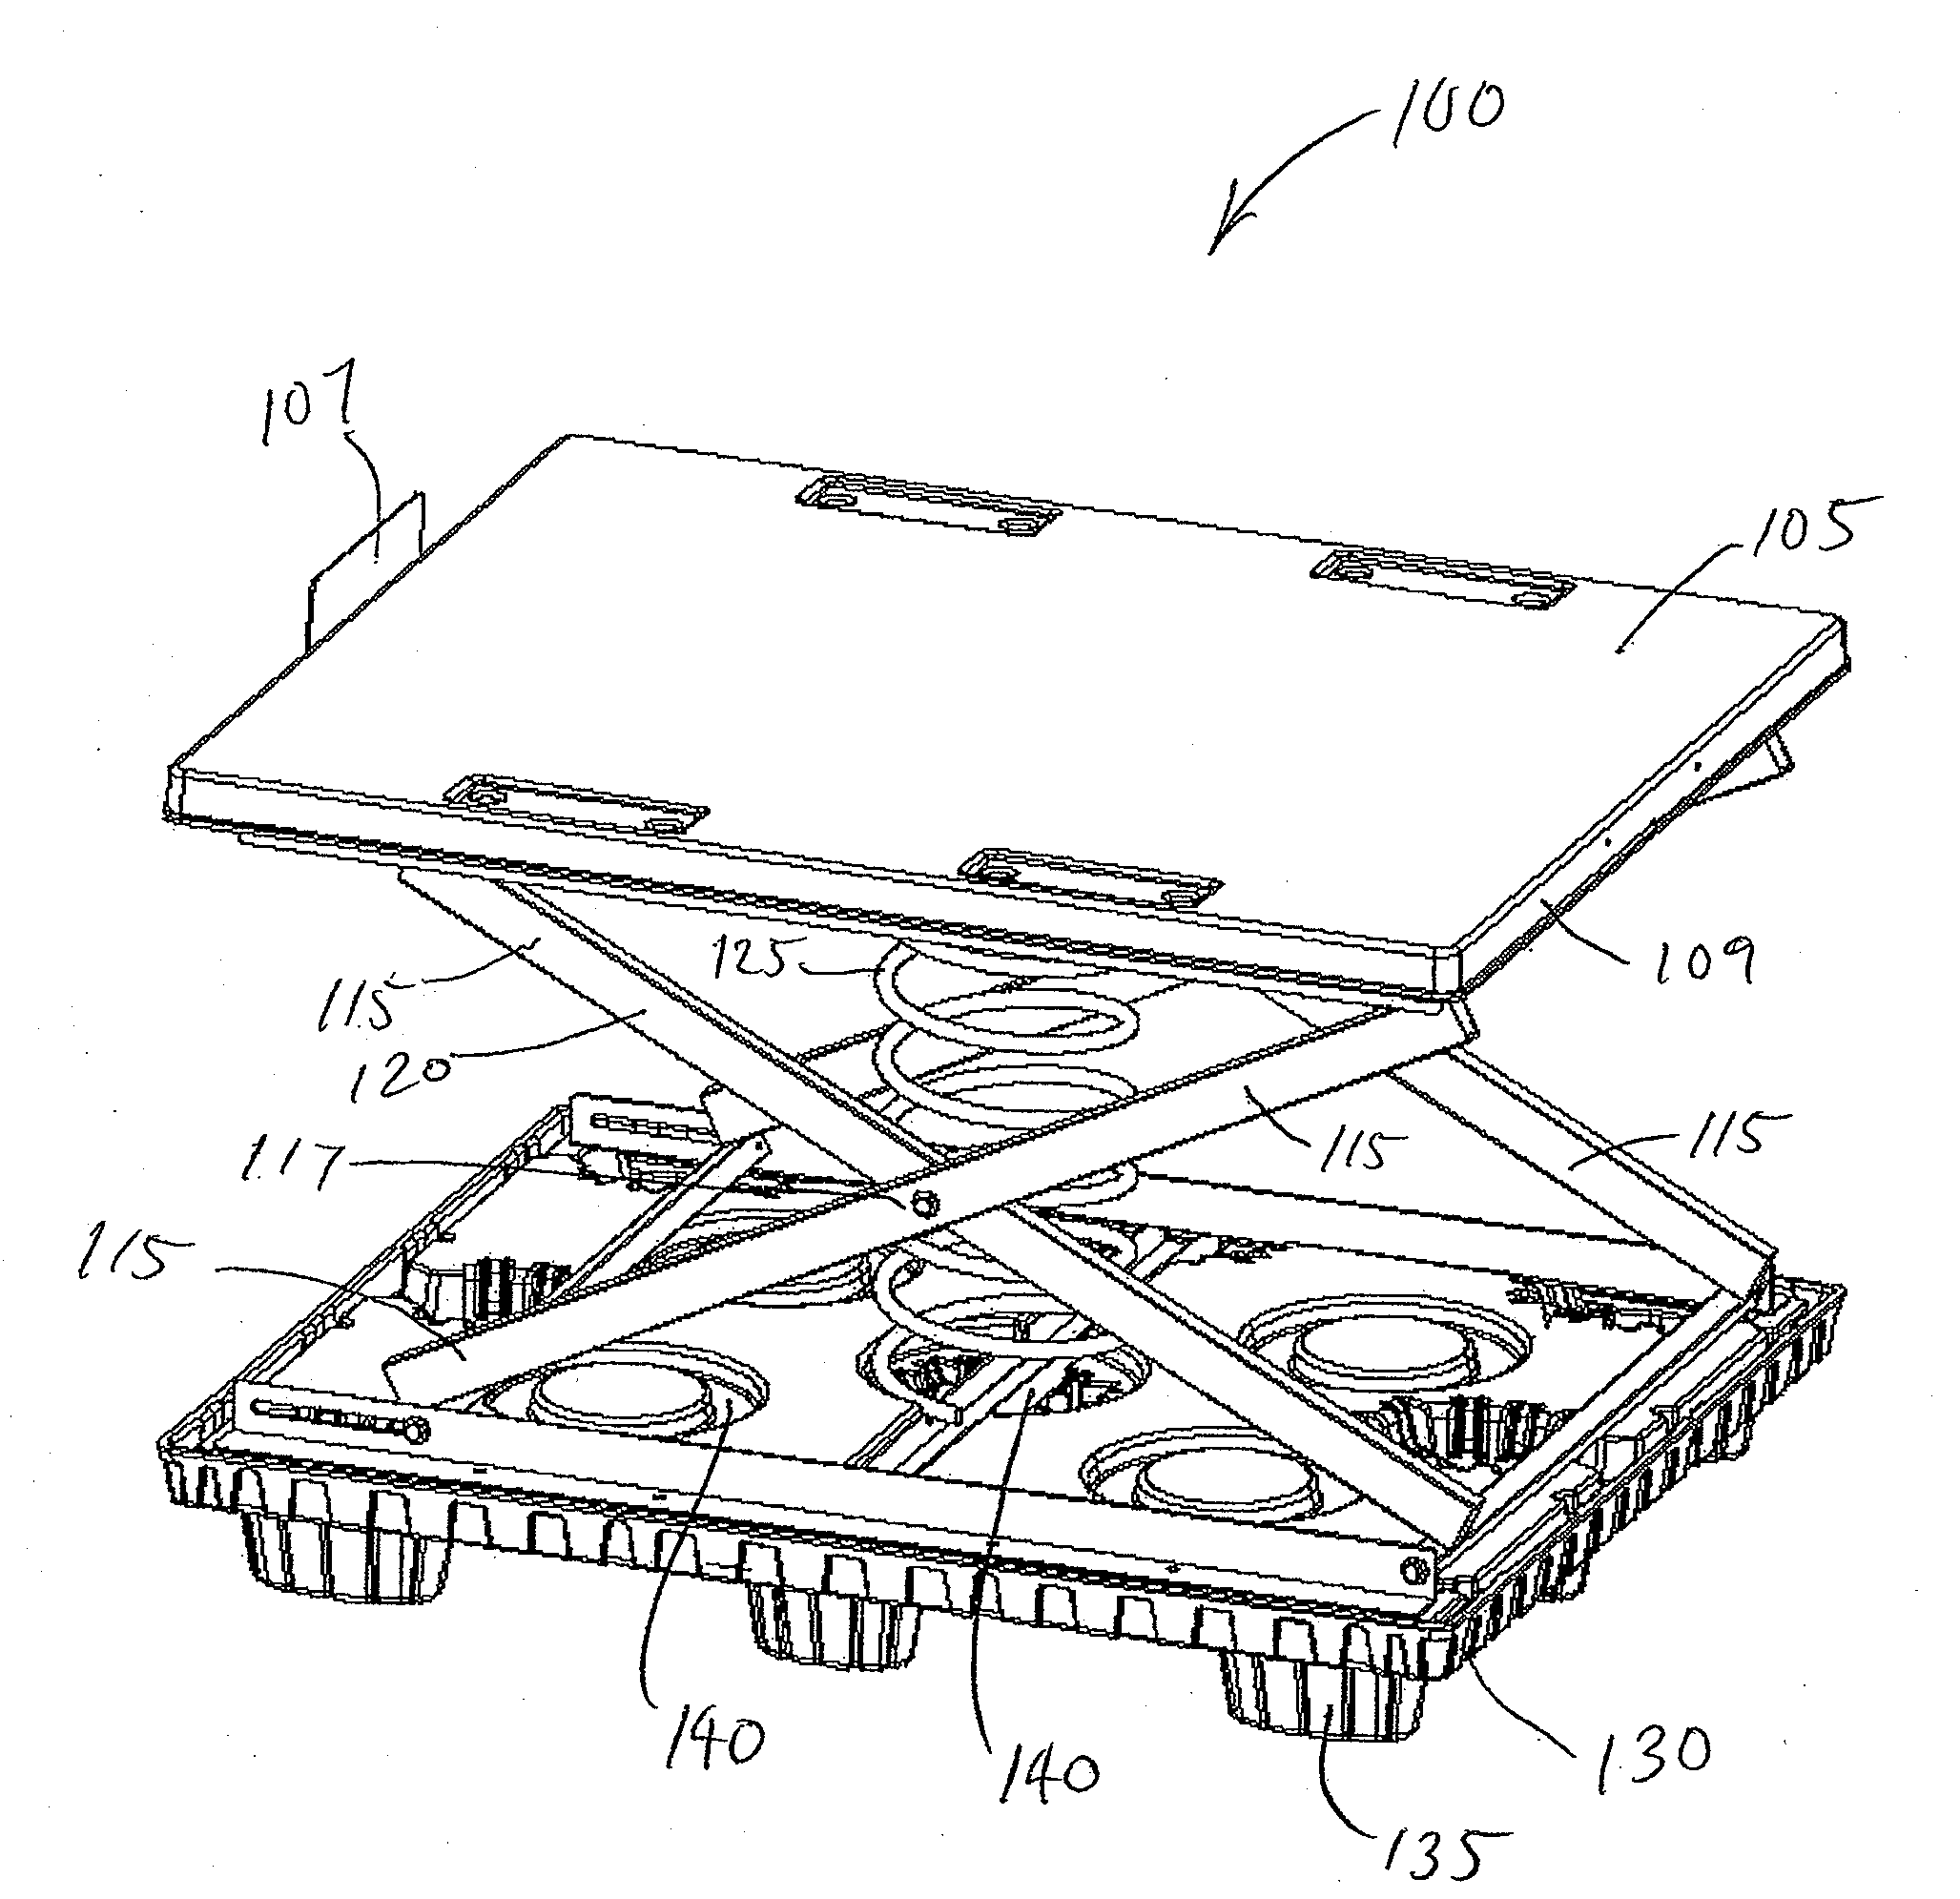 Product-Lifting Display and Merchandising System